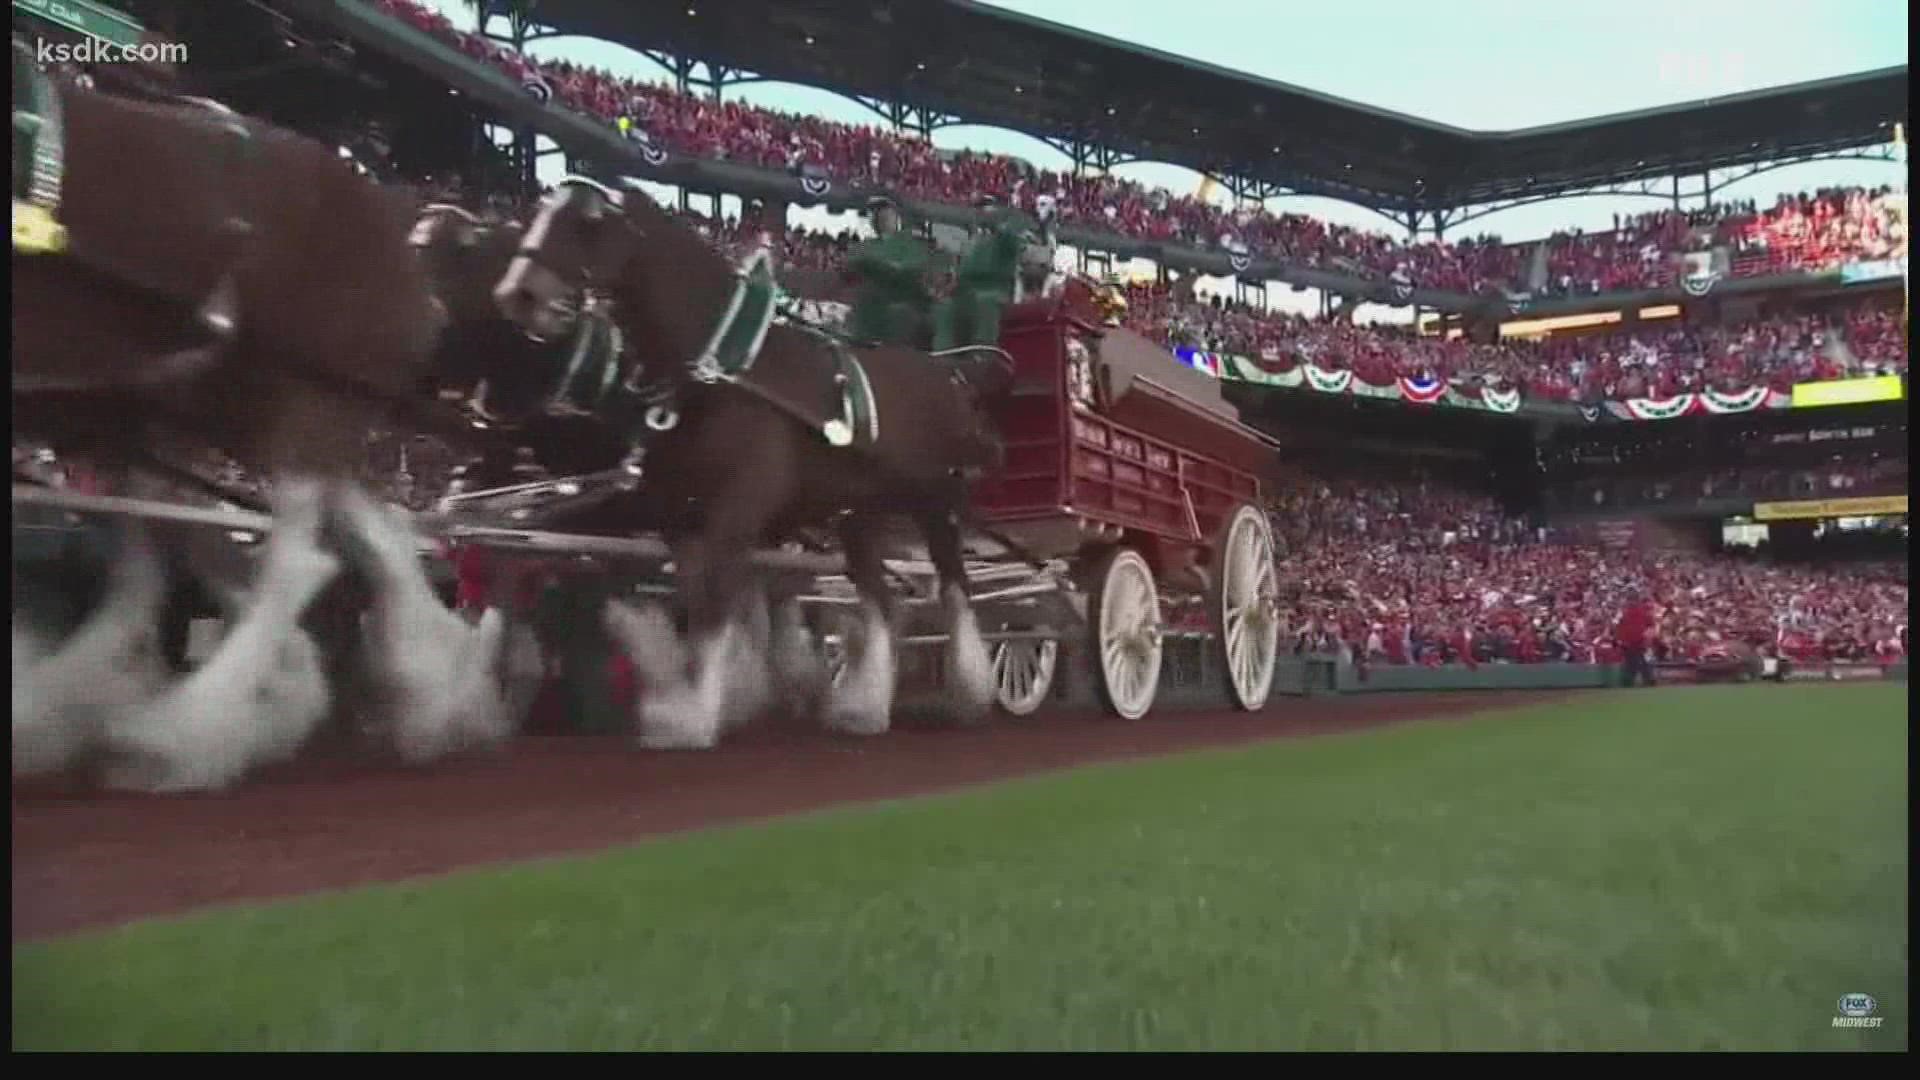 cardinals opening day 2022